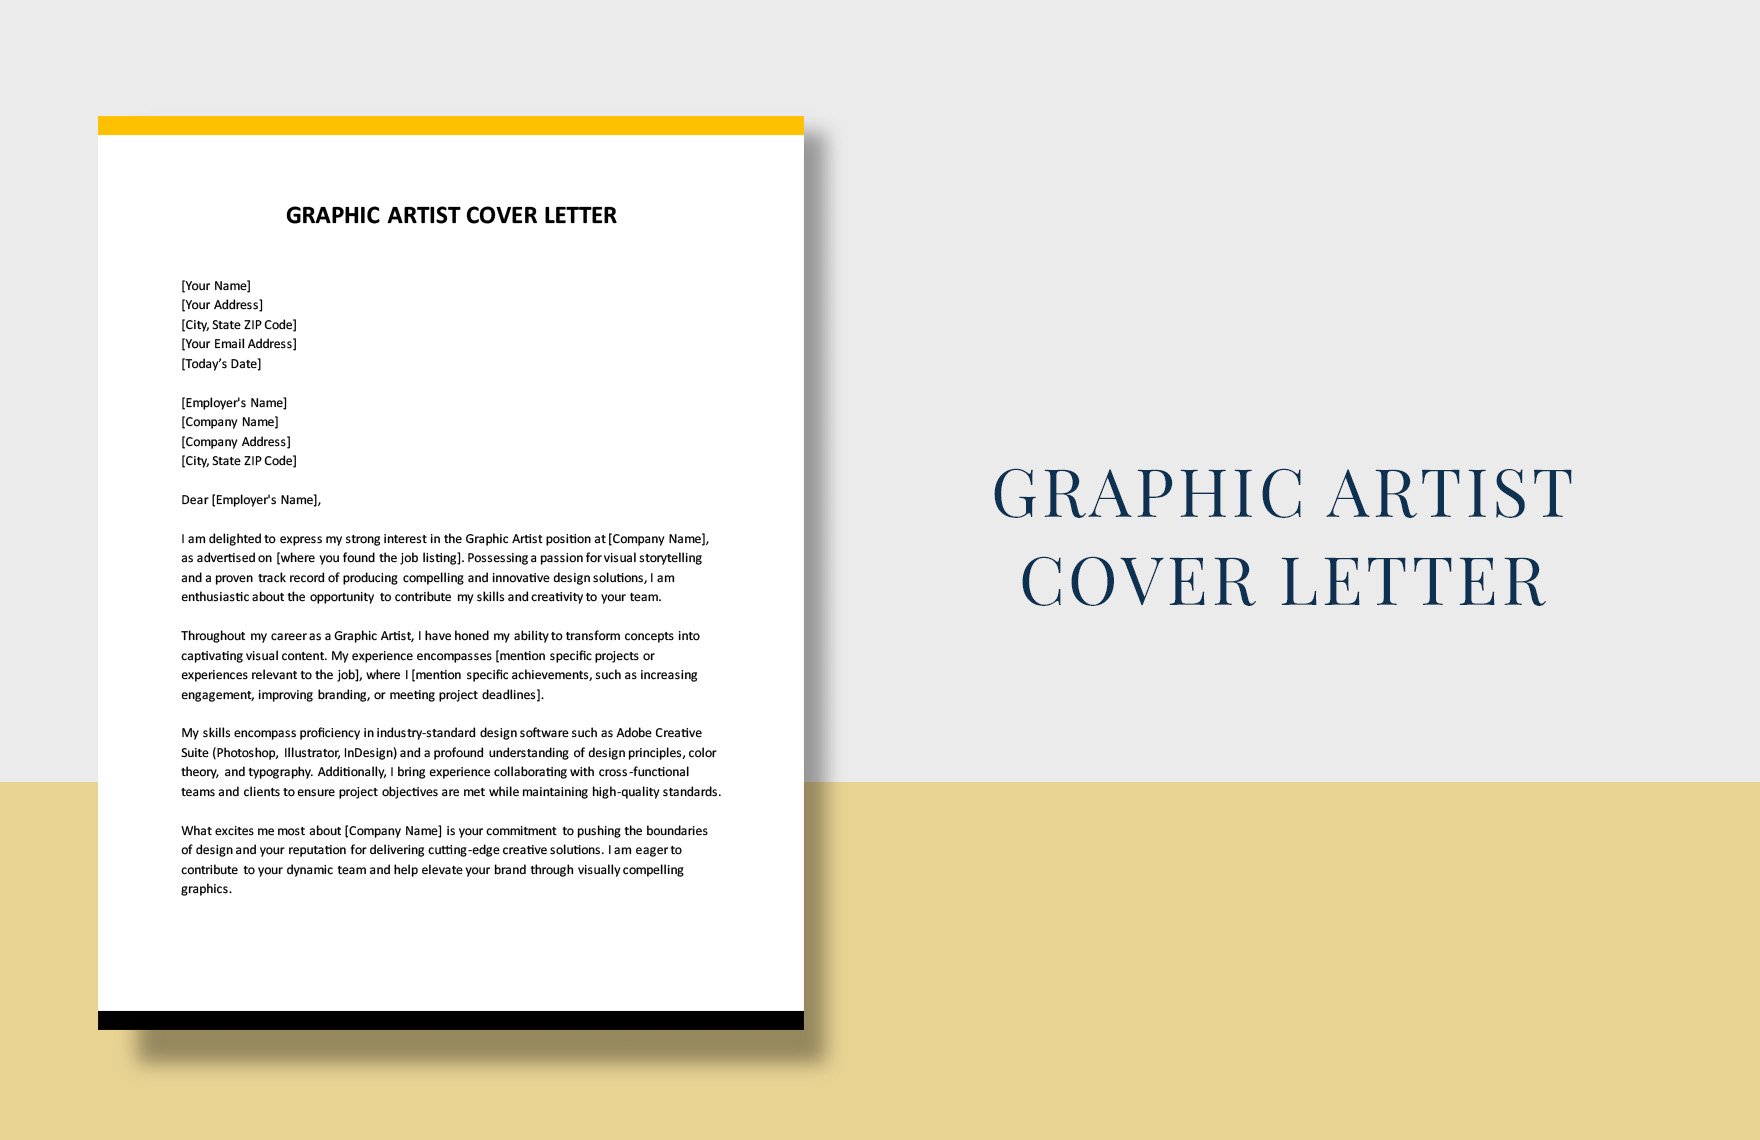 Graphic Artist Cover Letter in Word, Google Docs, PDF